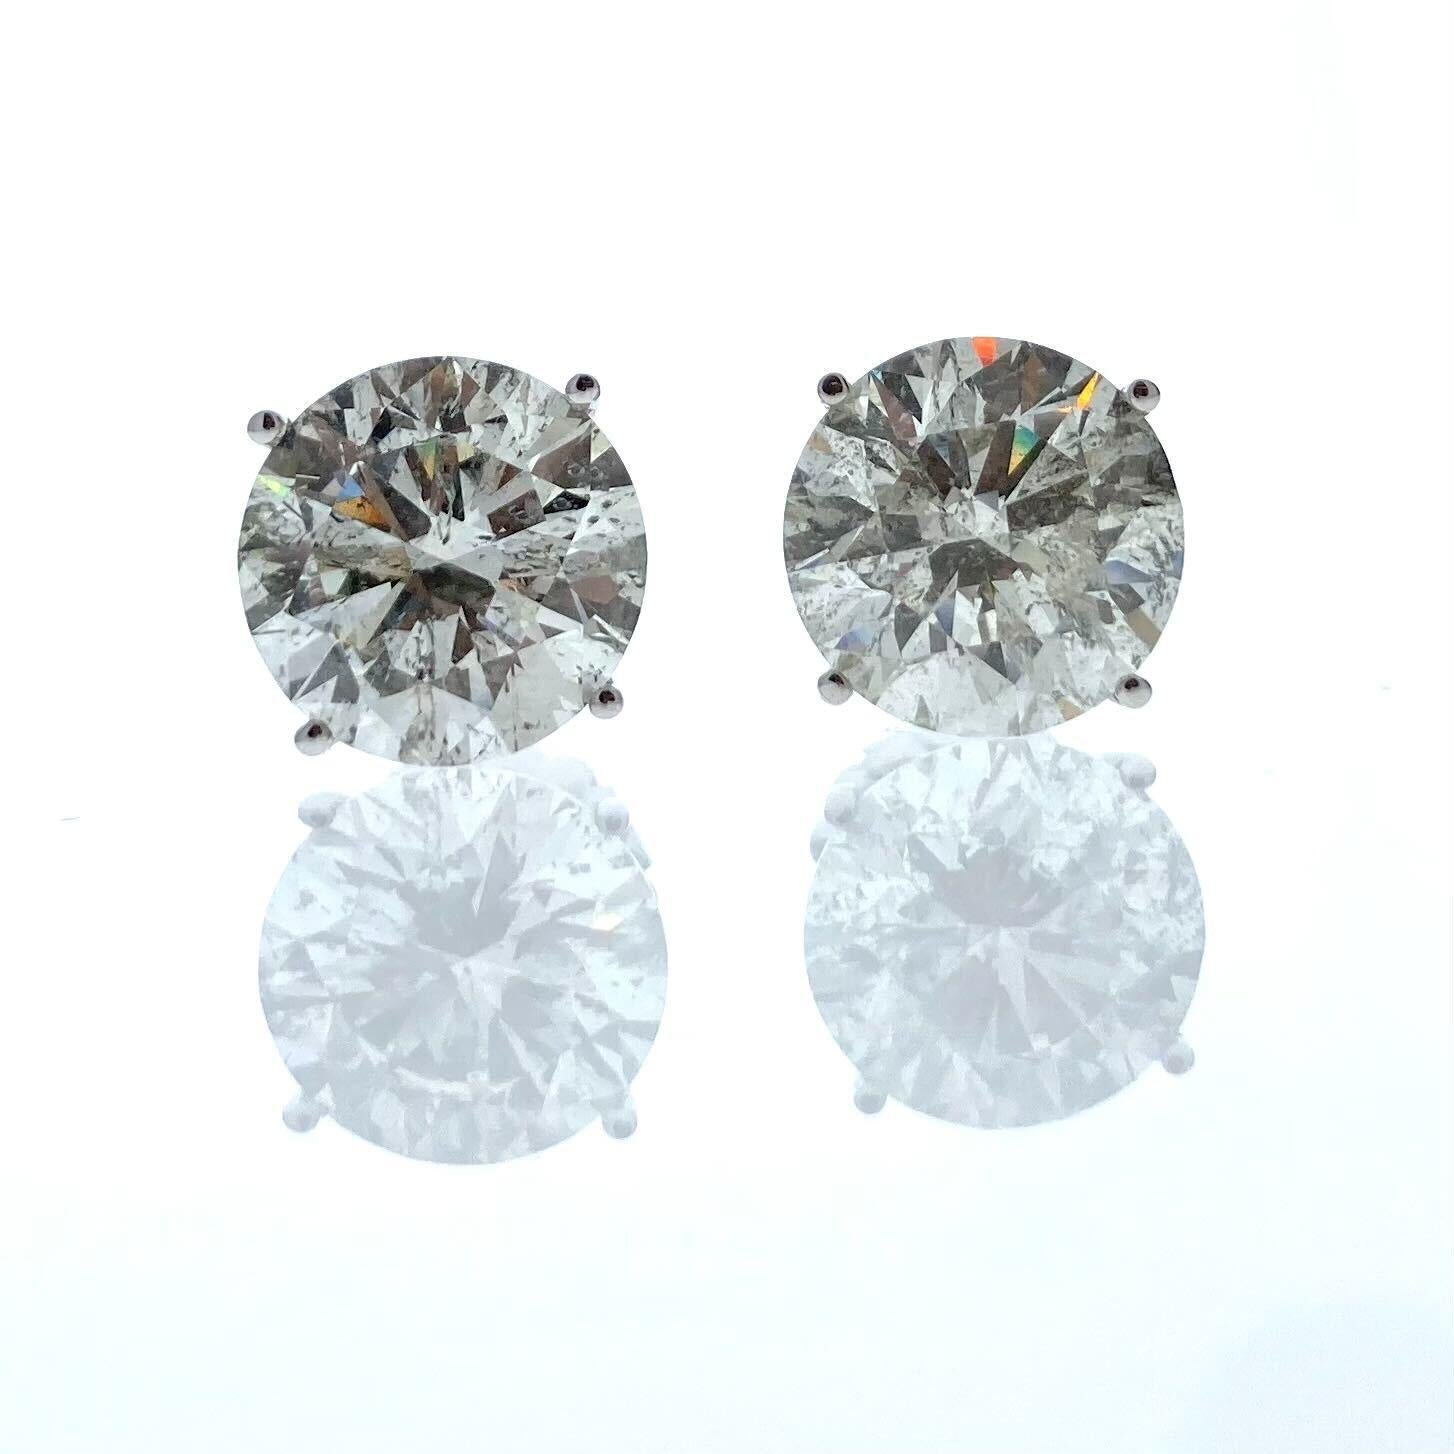 Contemporary 10.03 Total Carat Weight AGS Certified Round Diamond Studs In 14k White Gold For Sale